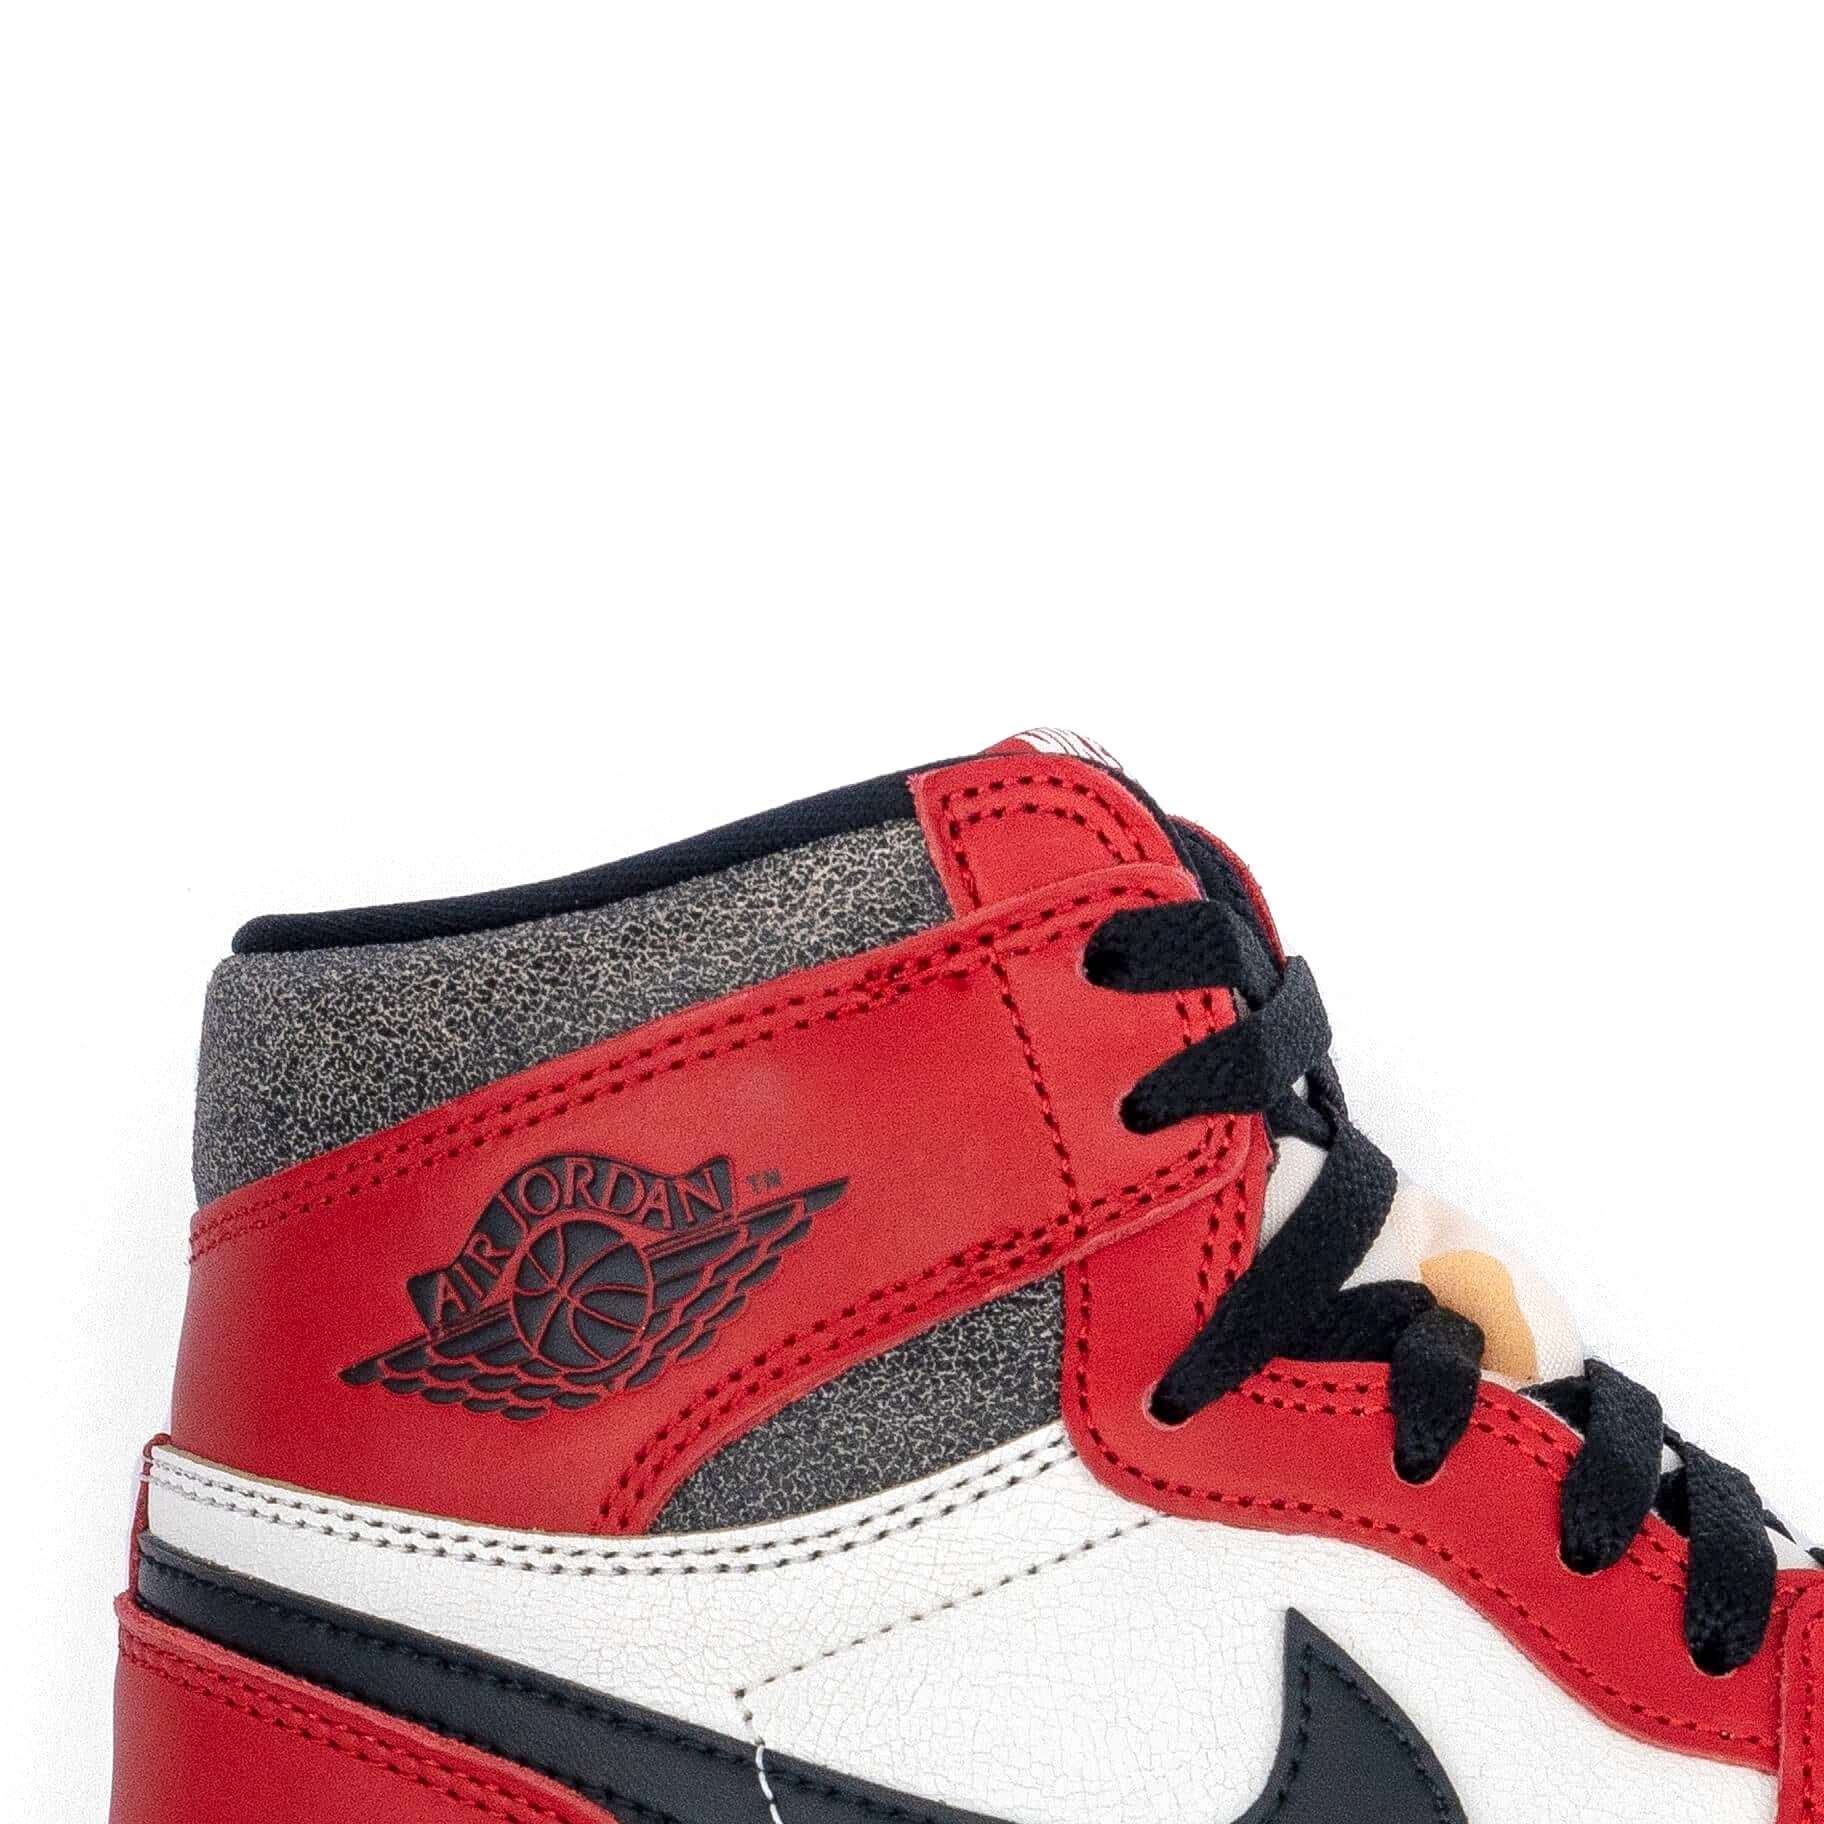 AIR JORDAN 1 RETRO HIGH CHICAGO LOST AND FOUND